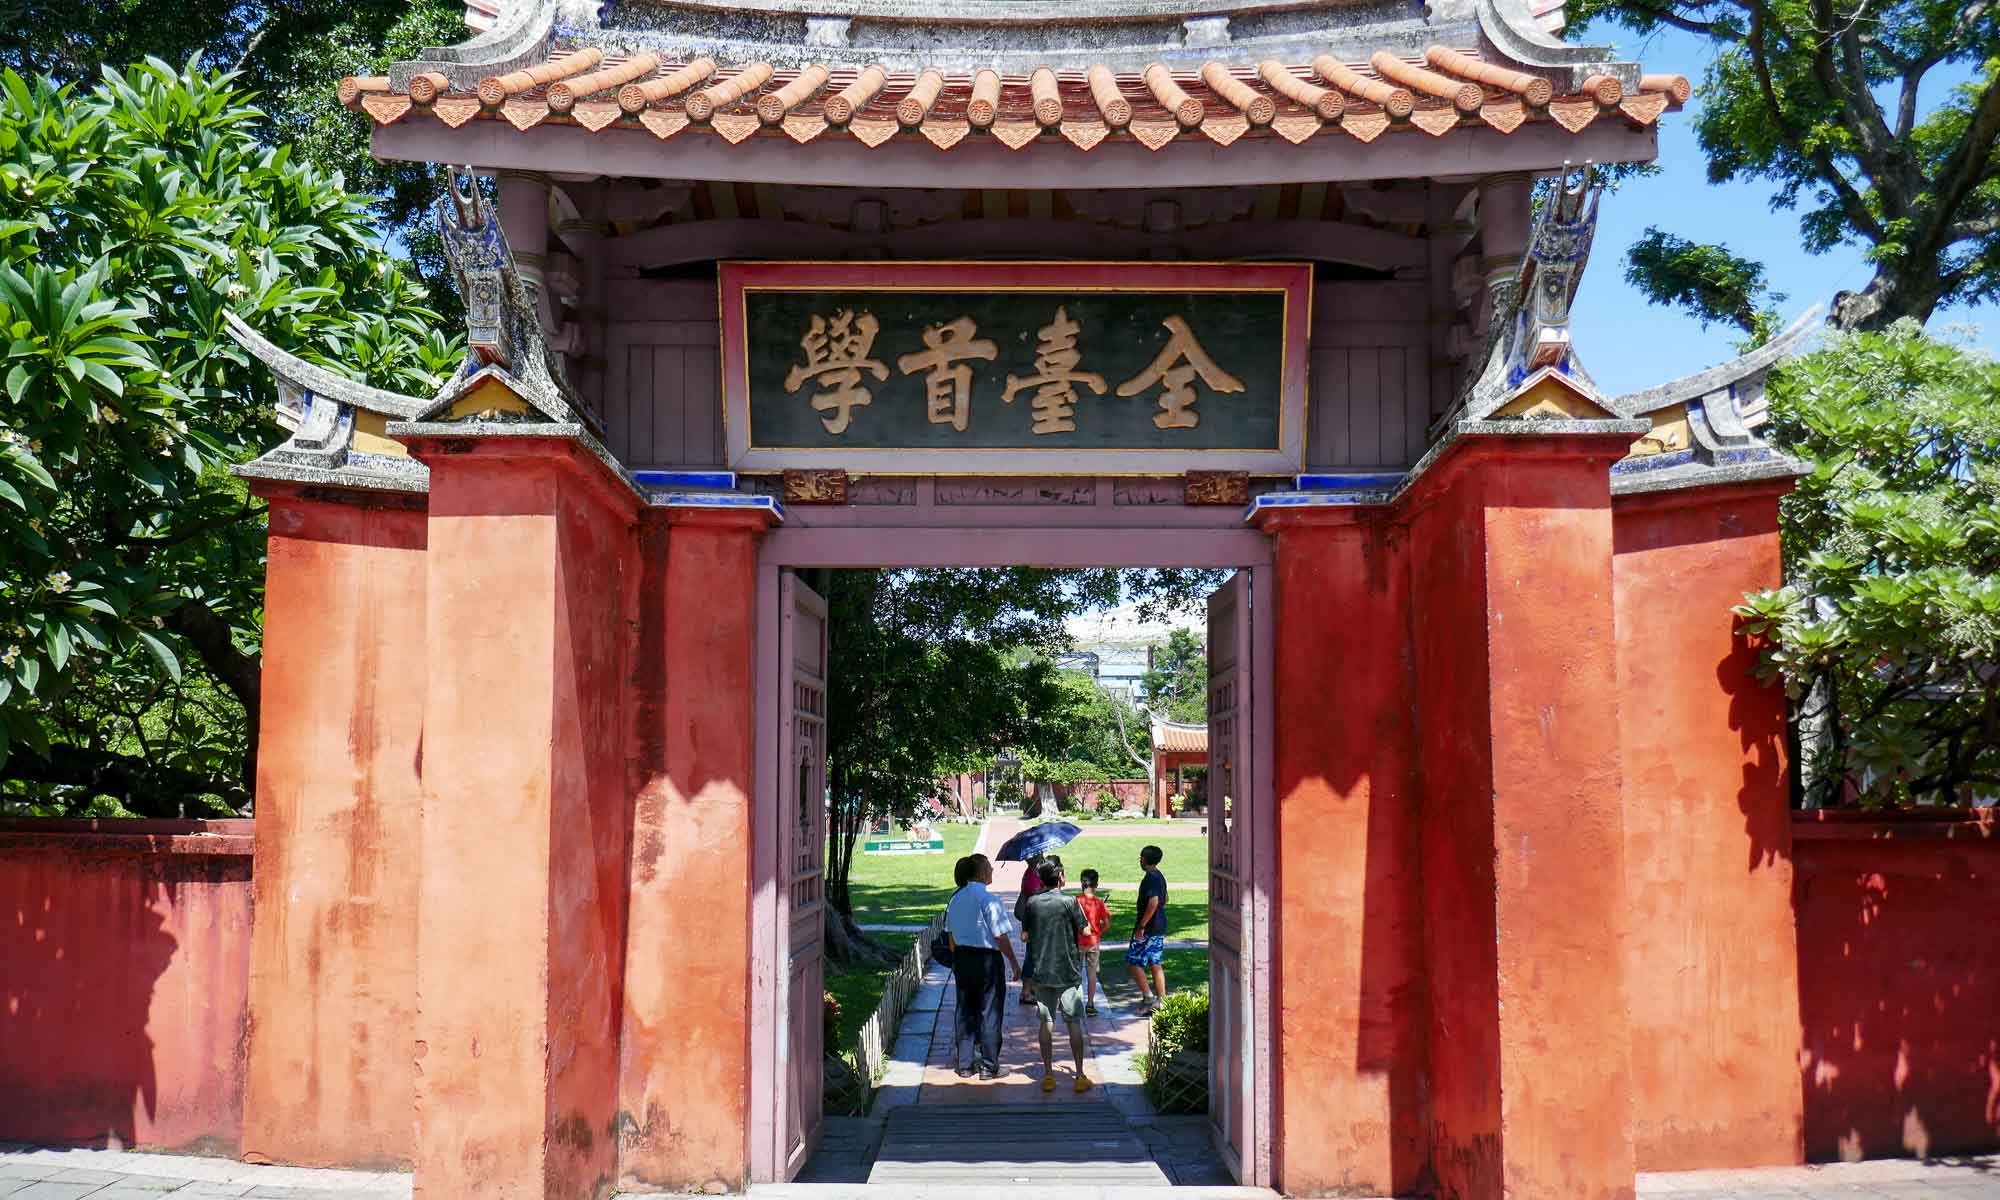 Entrance to the outskirts of the Confucius temple